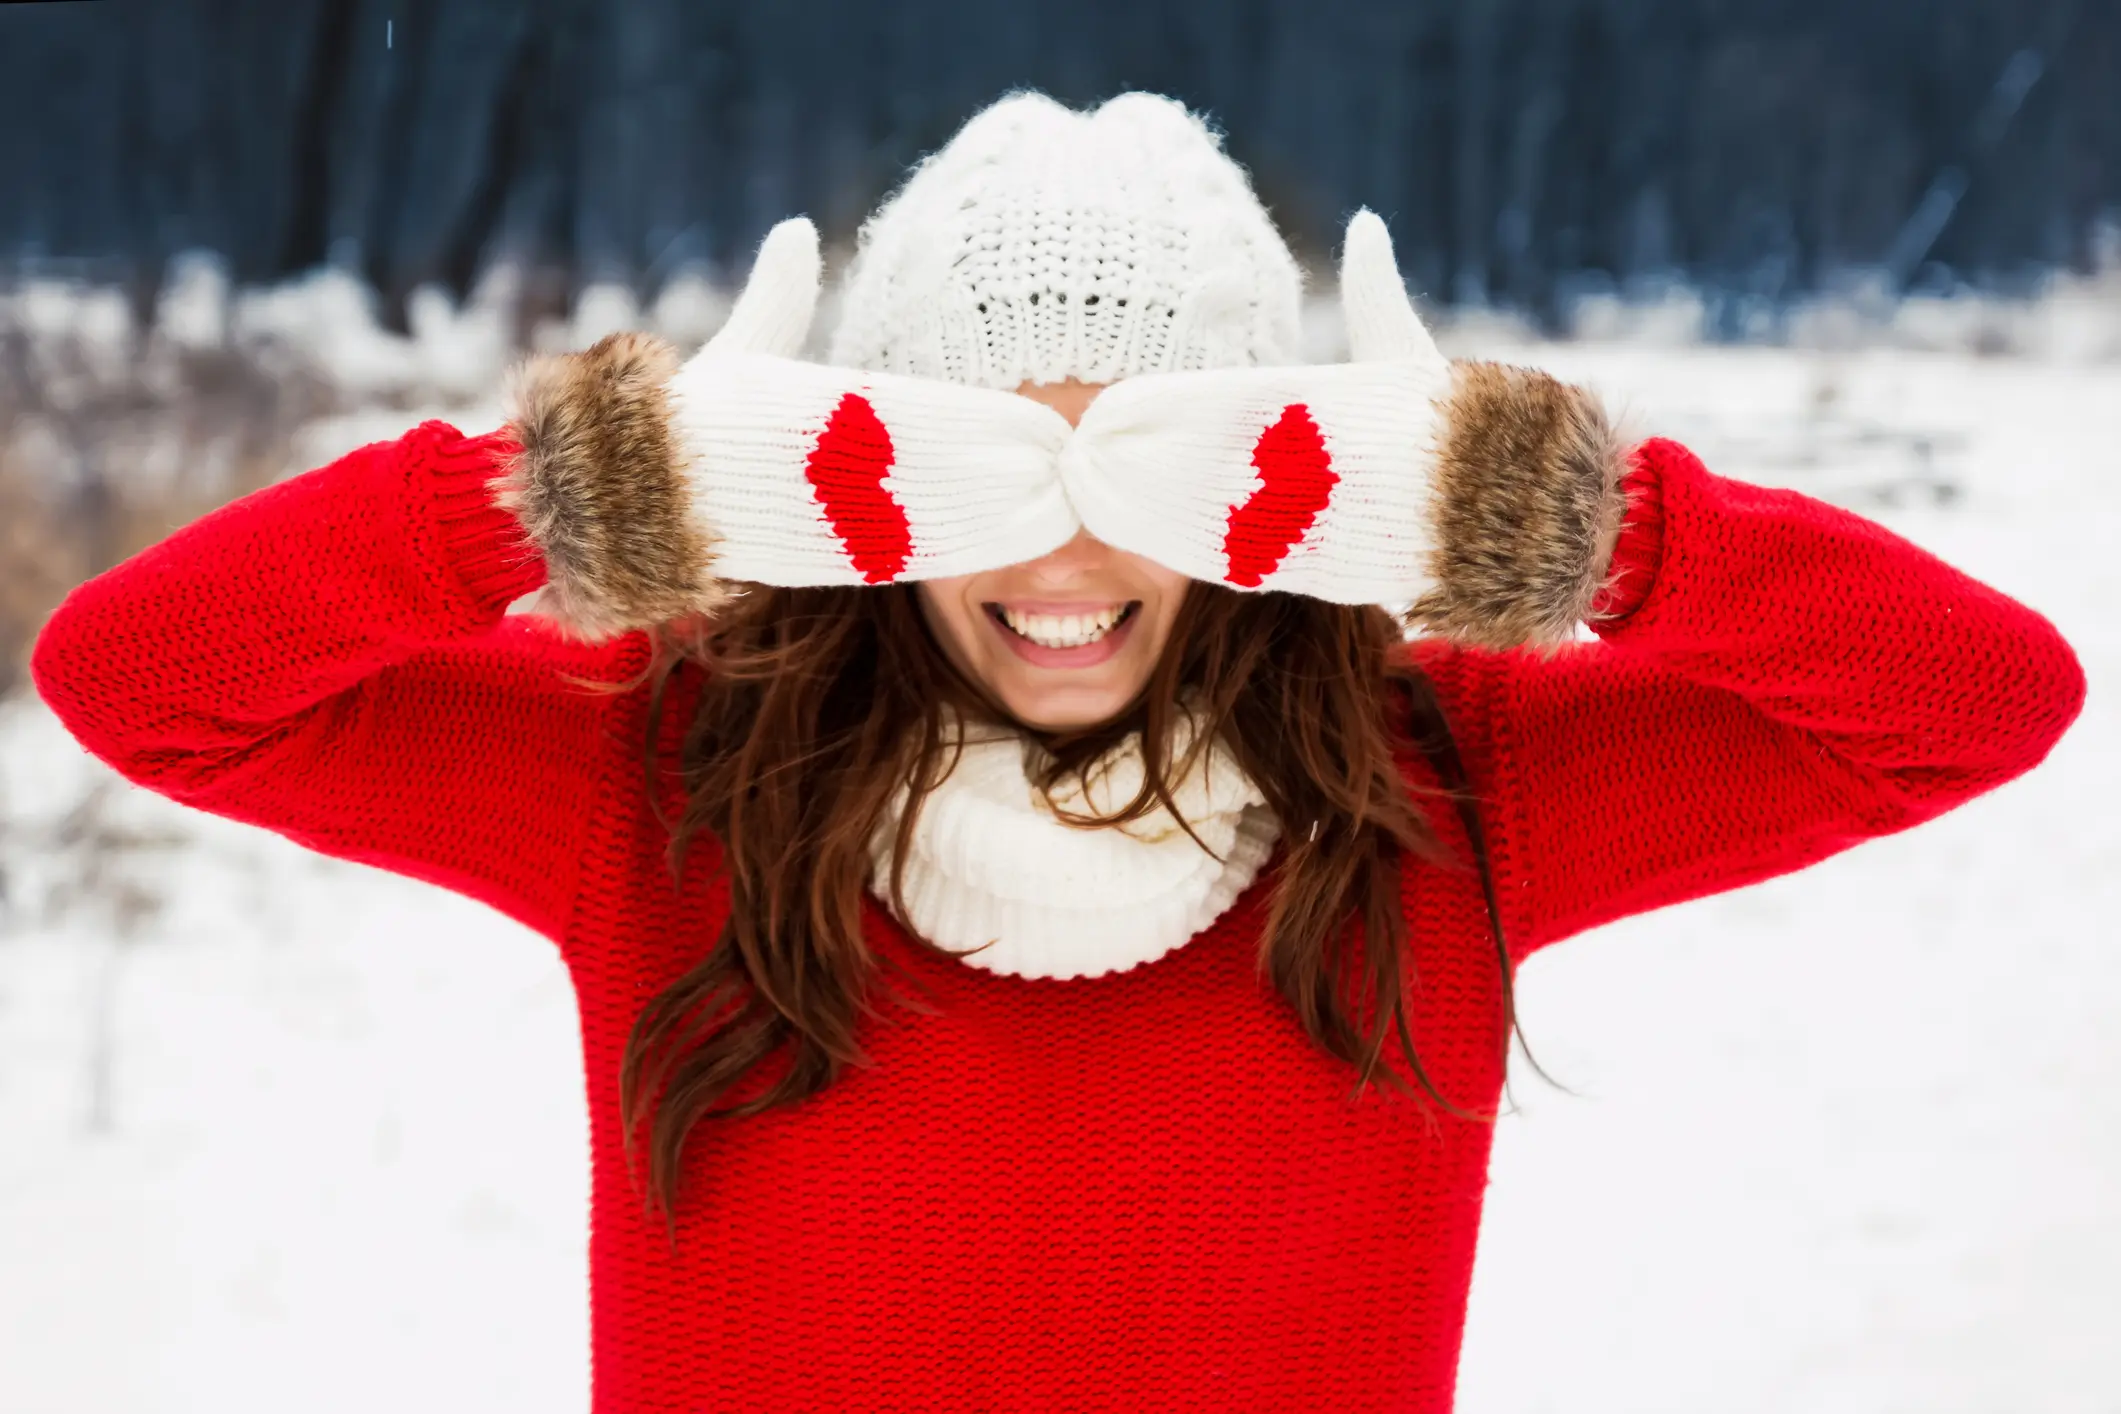 Woman covering eyes in the snow